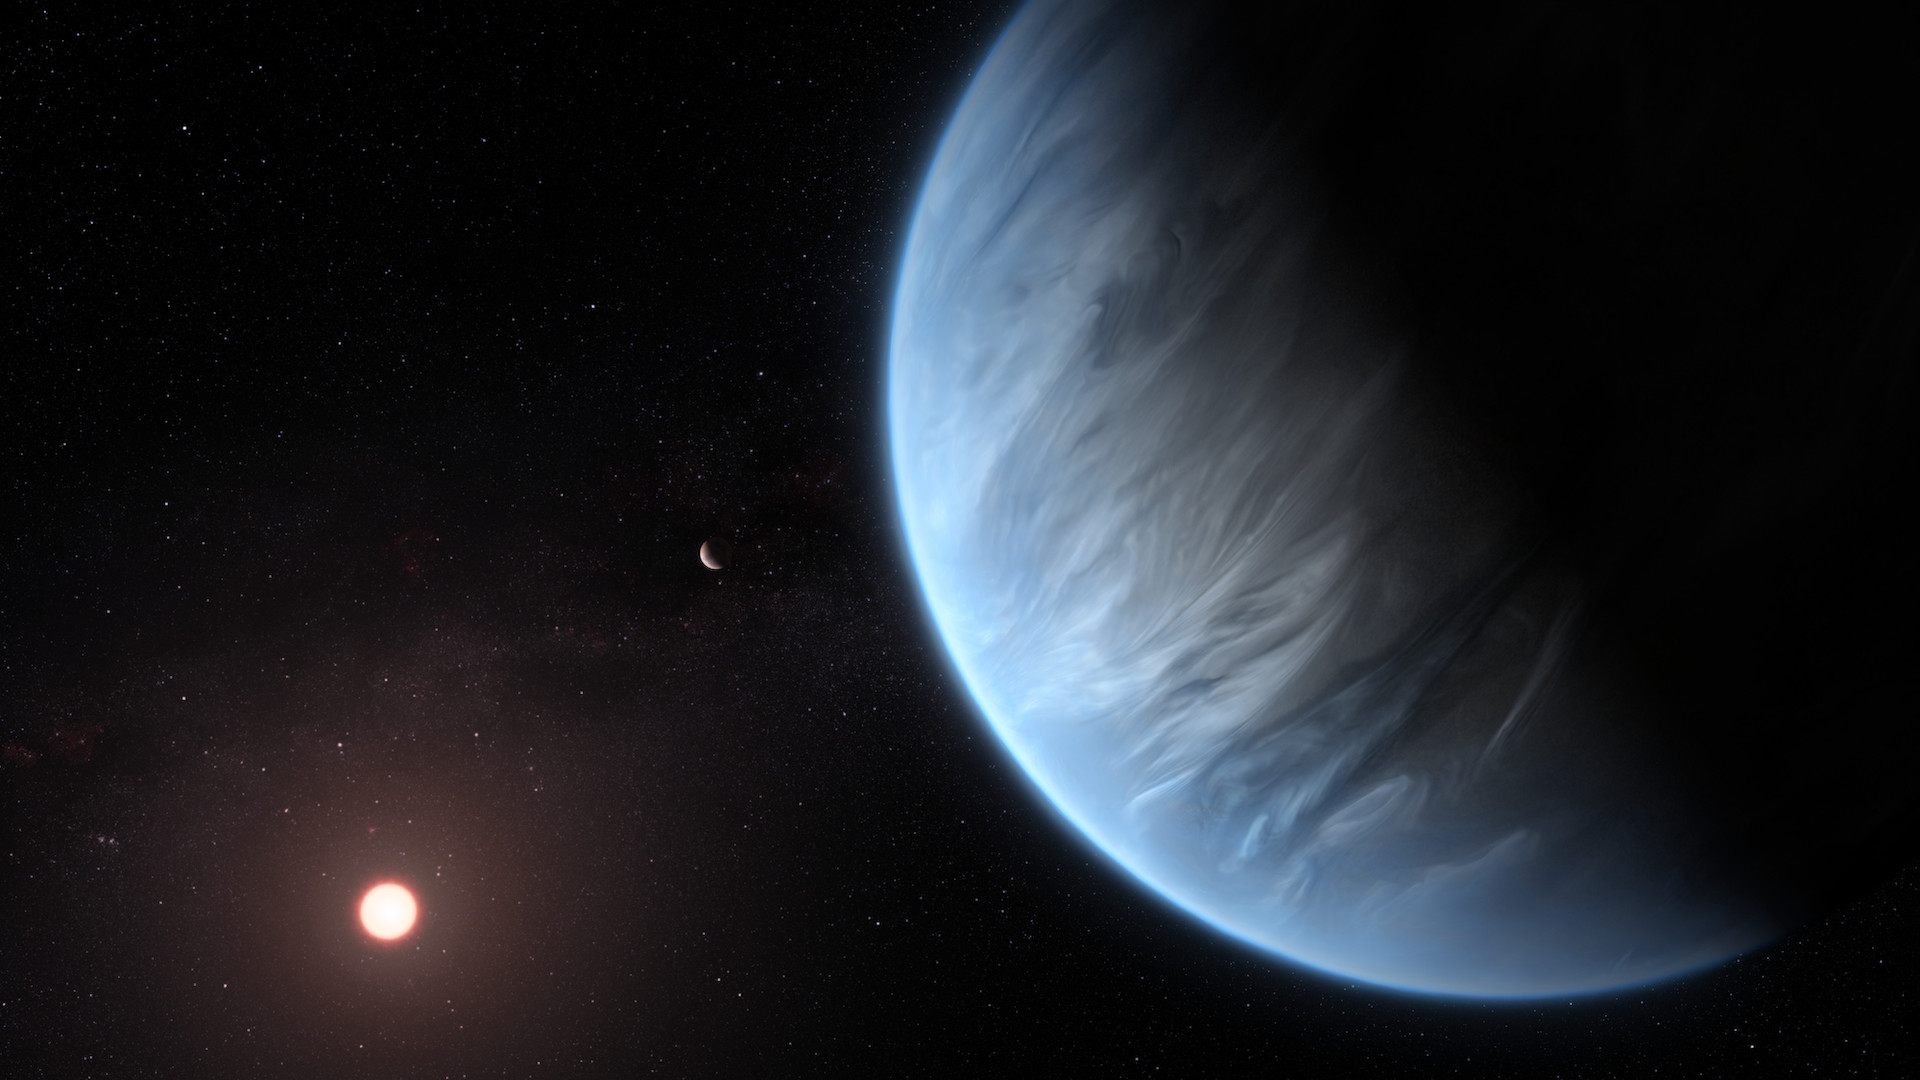 Preview Image for Hubble Finds Water Vapor On Distant Exoplanet